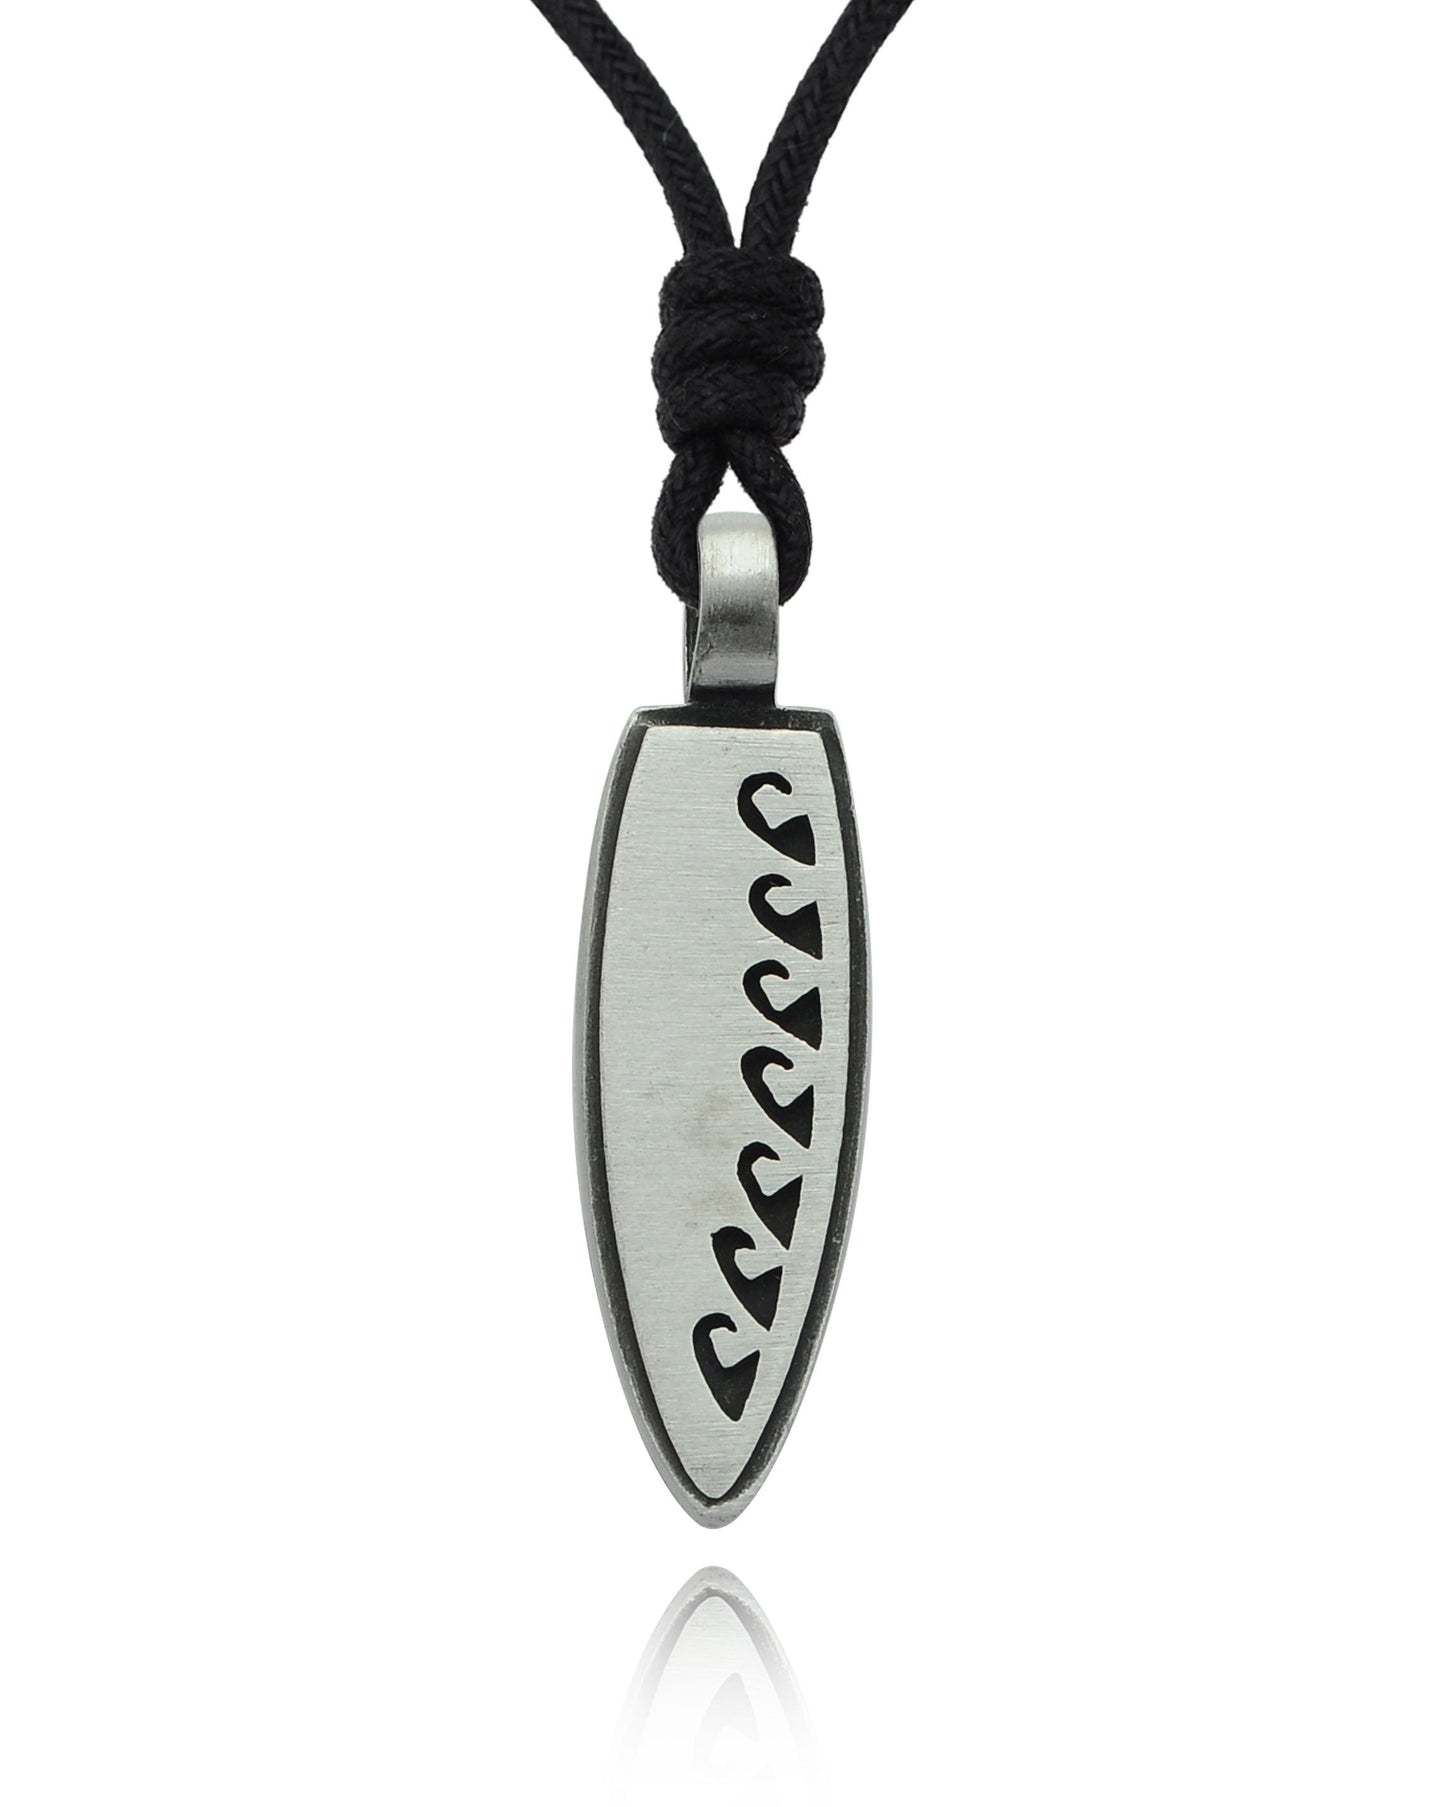 Surfboard Silver Pewter Charm Necklace Pendant Jewelry